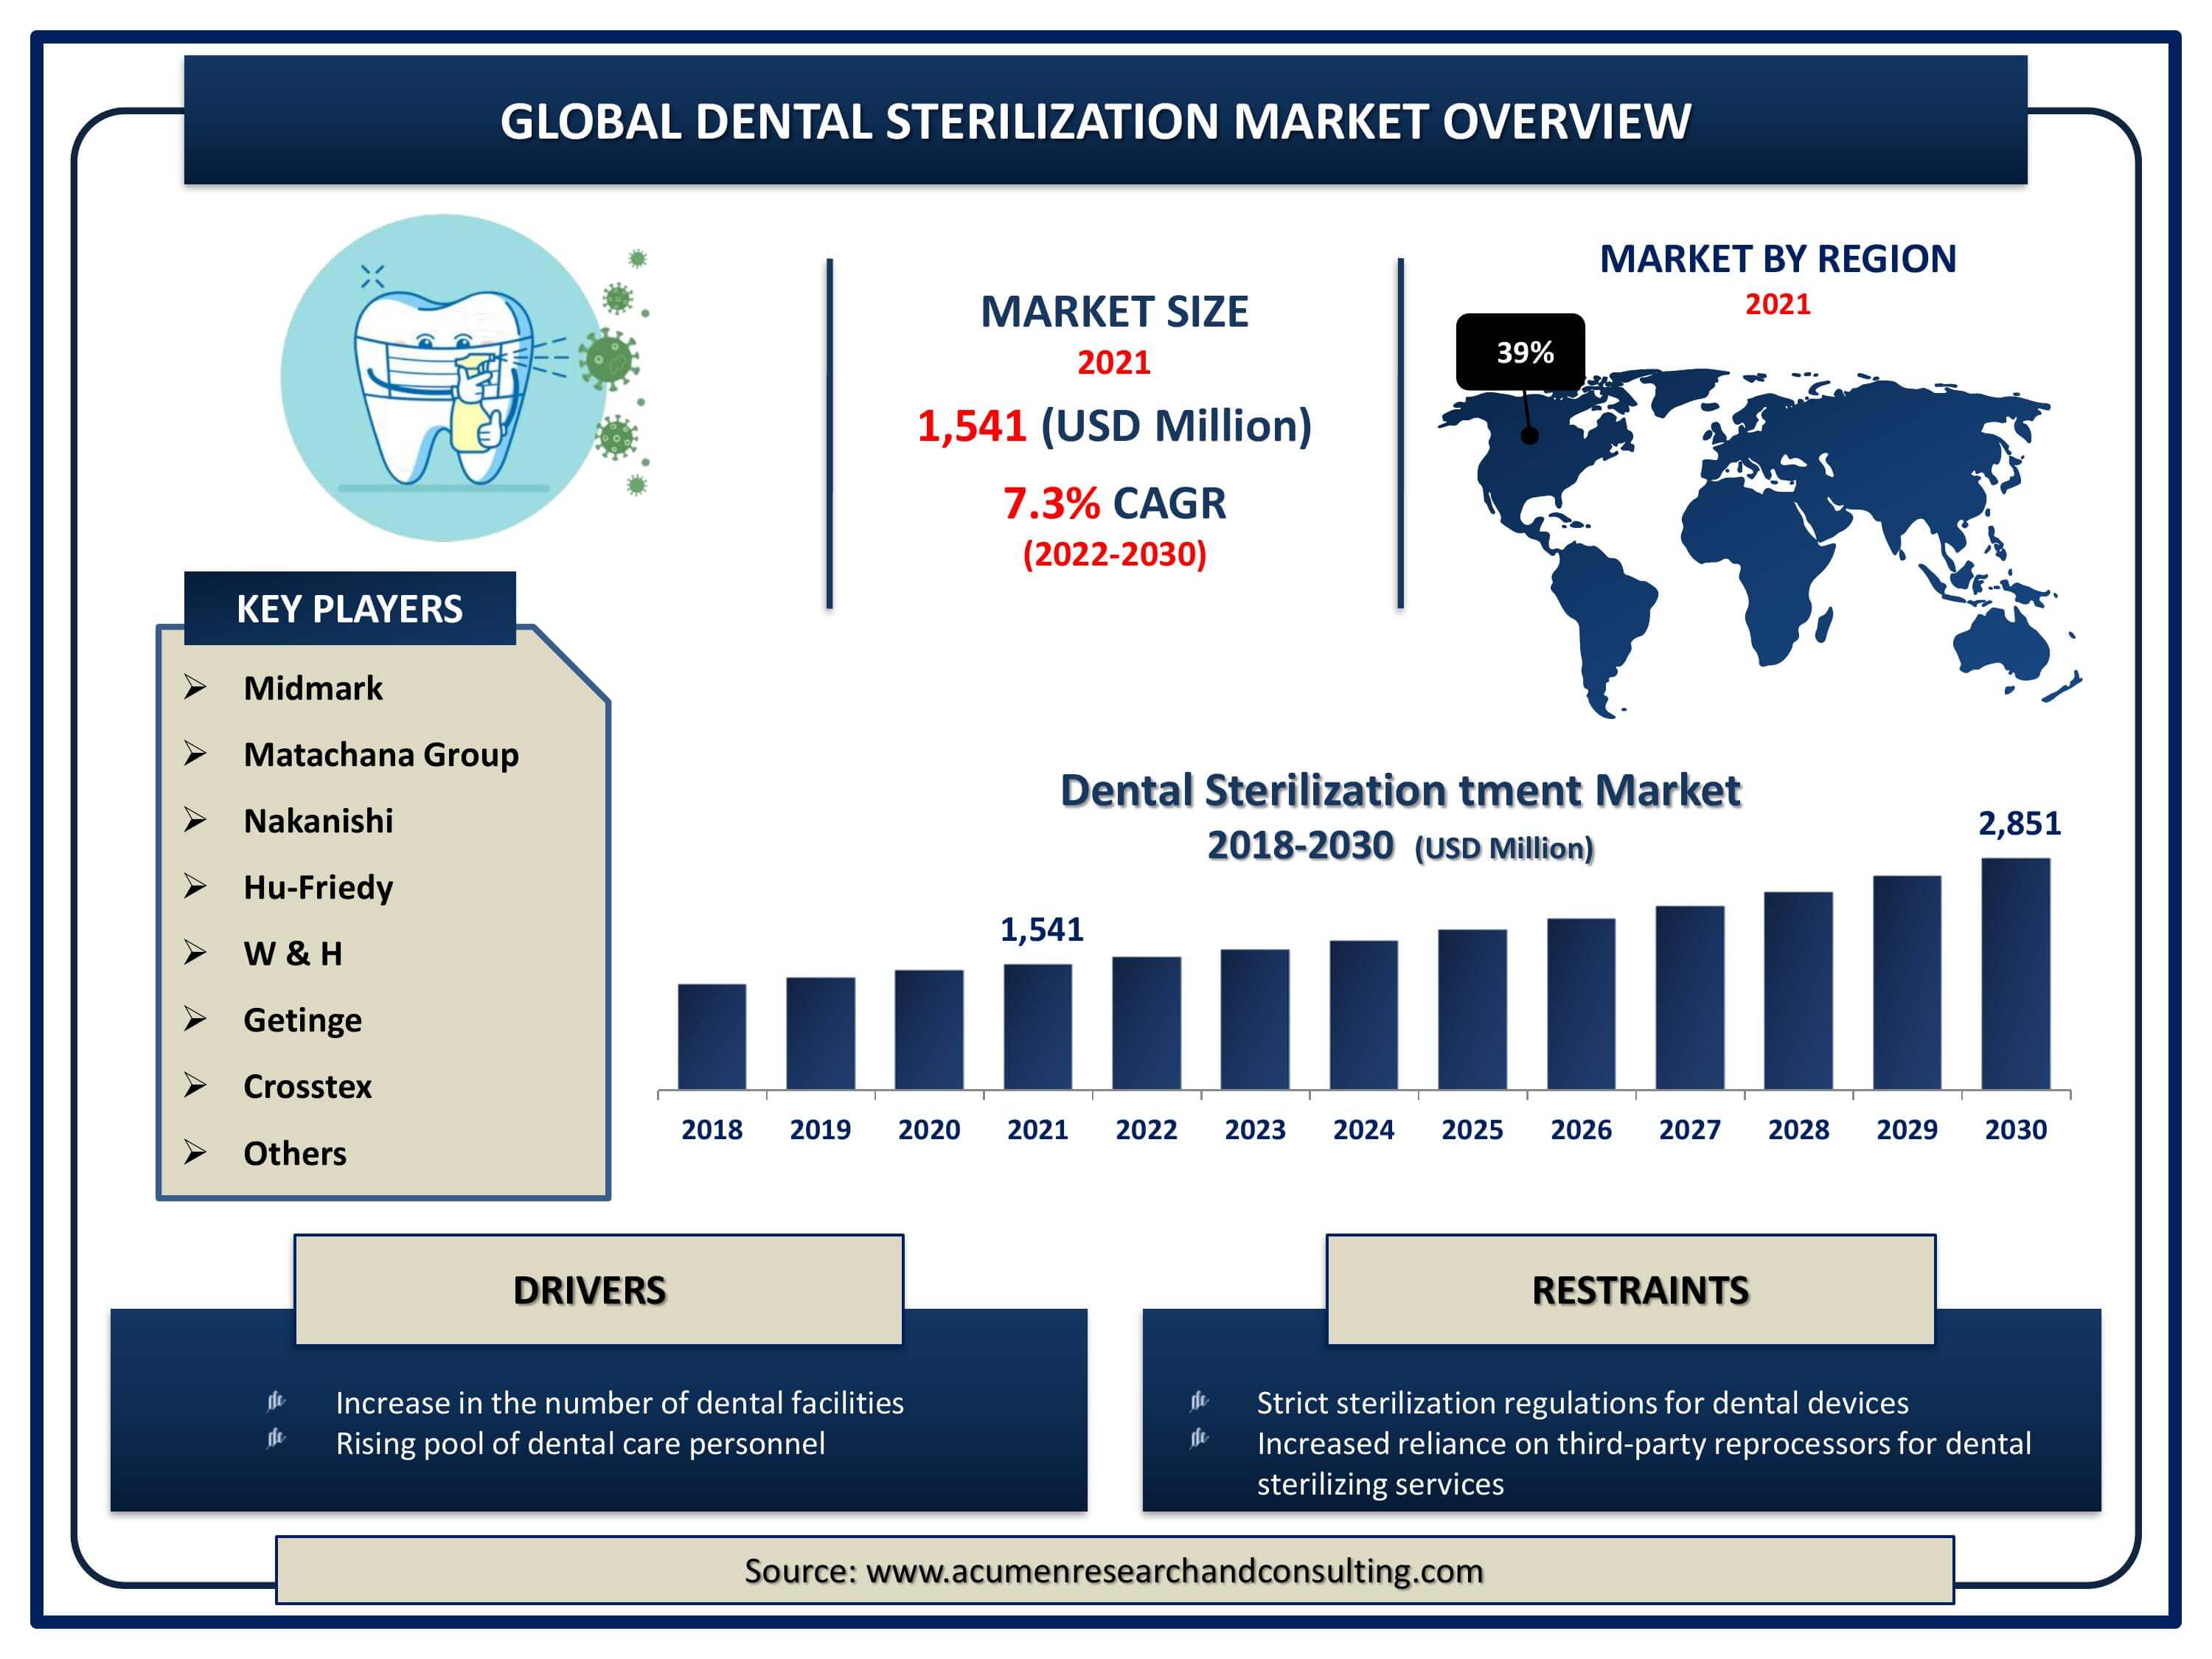 Global dental sterilization market revenue is estimated to expand by USD 2,851 million by 2030, with a 7.3% CAGR from 2022 to 2030.